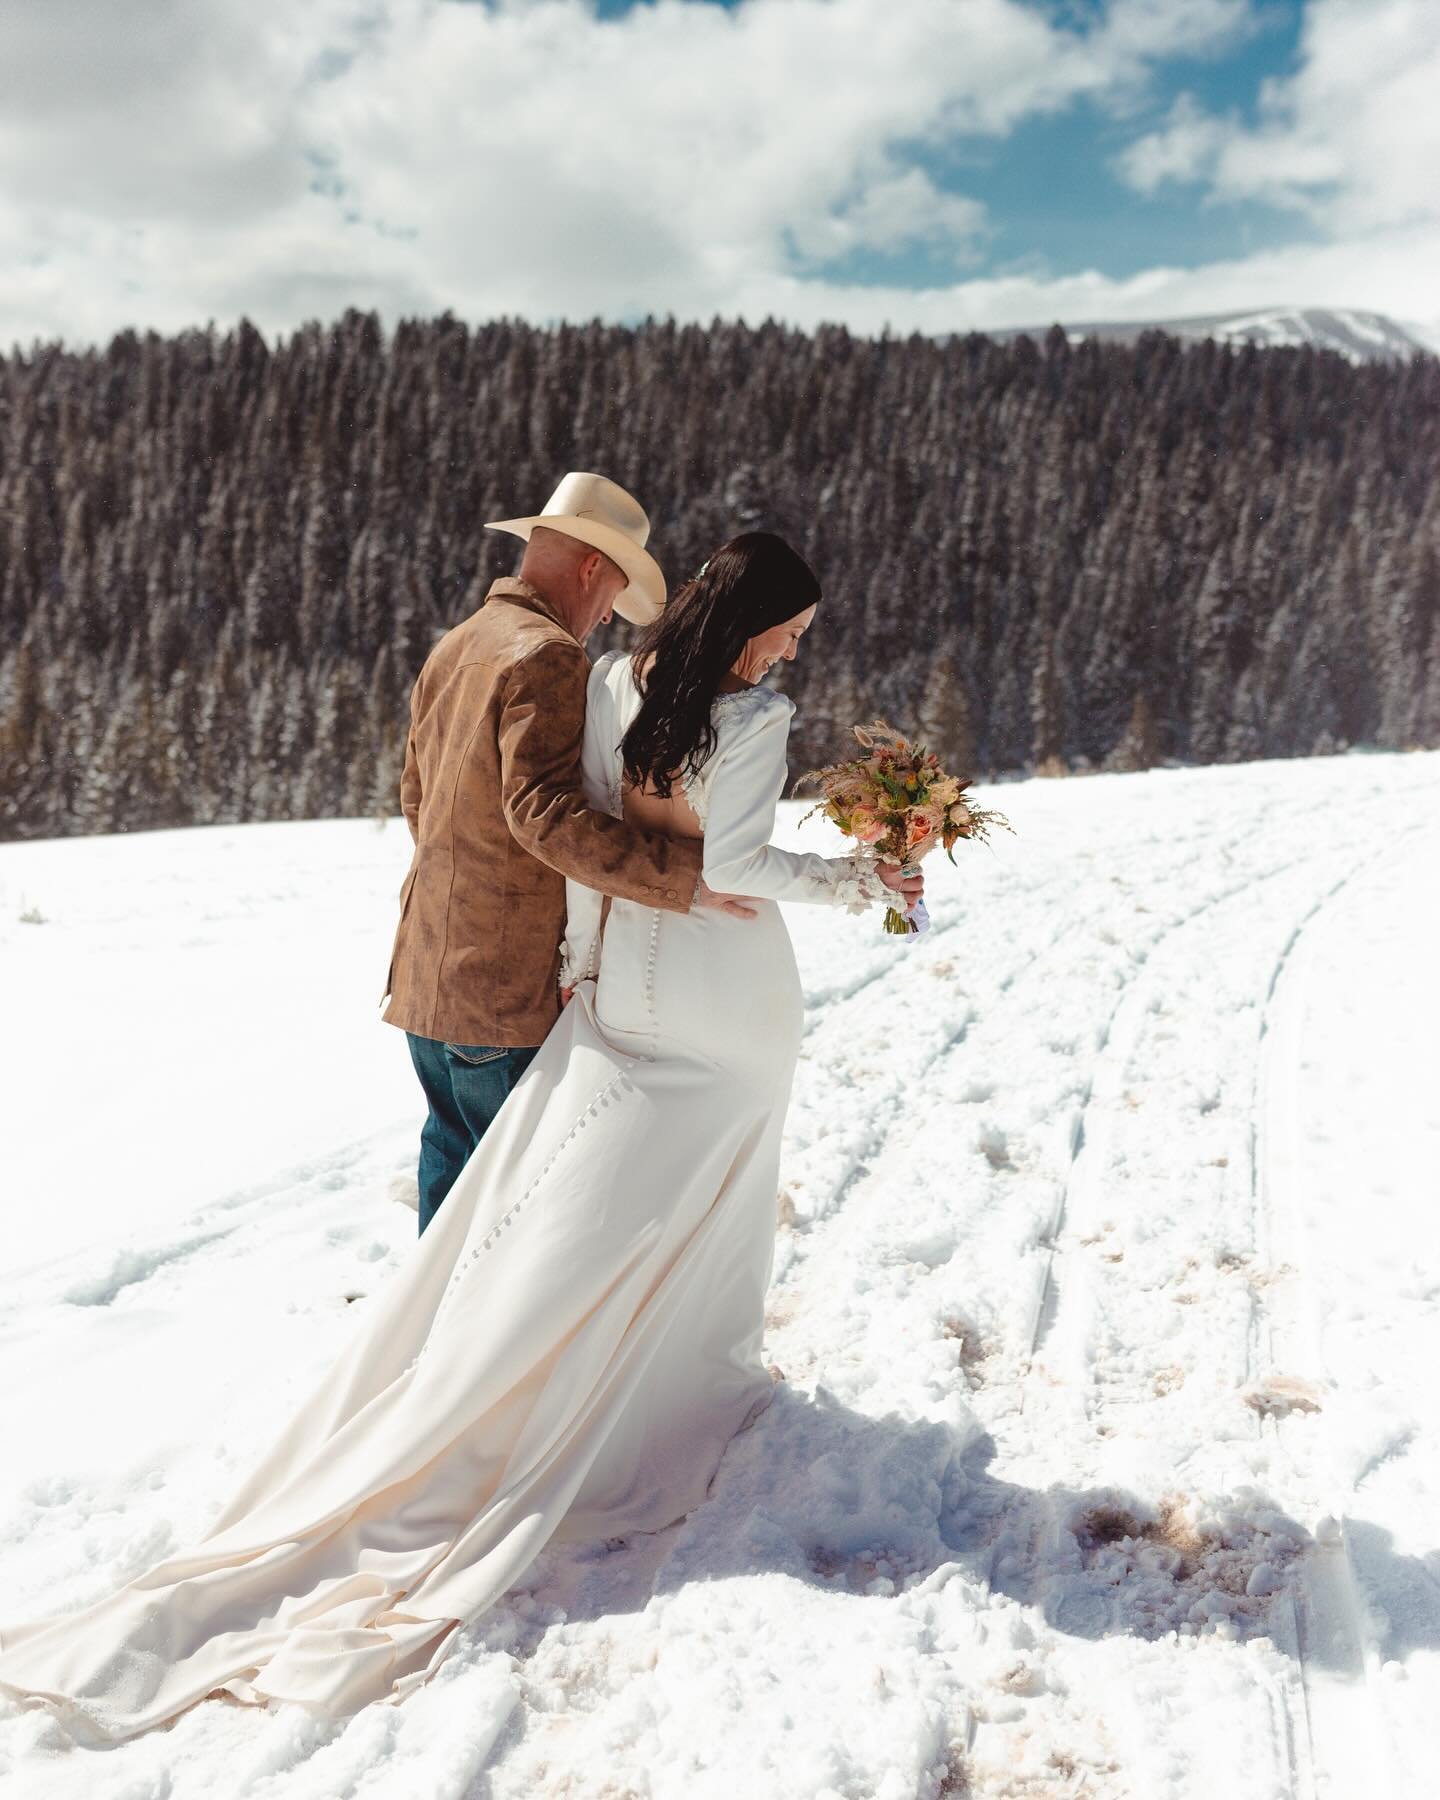 gone with the wind.

#elopement #lonemountainranch #lonemountaineanchelopement #elopementphotographer #elopementphotography #elopementphotographer #montana #bigskymontana